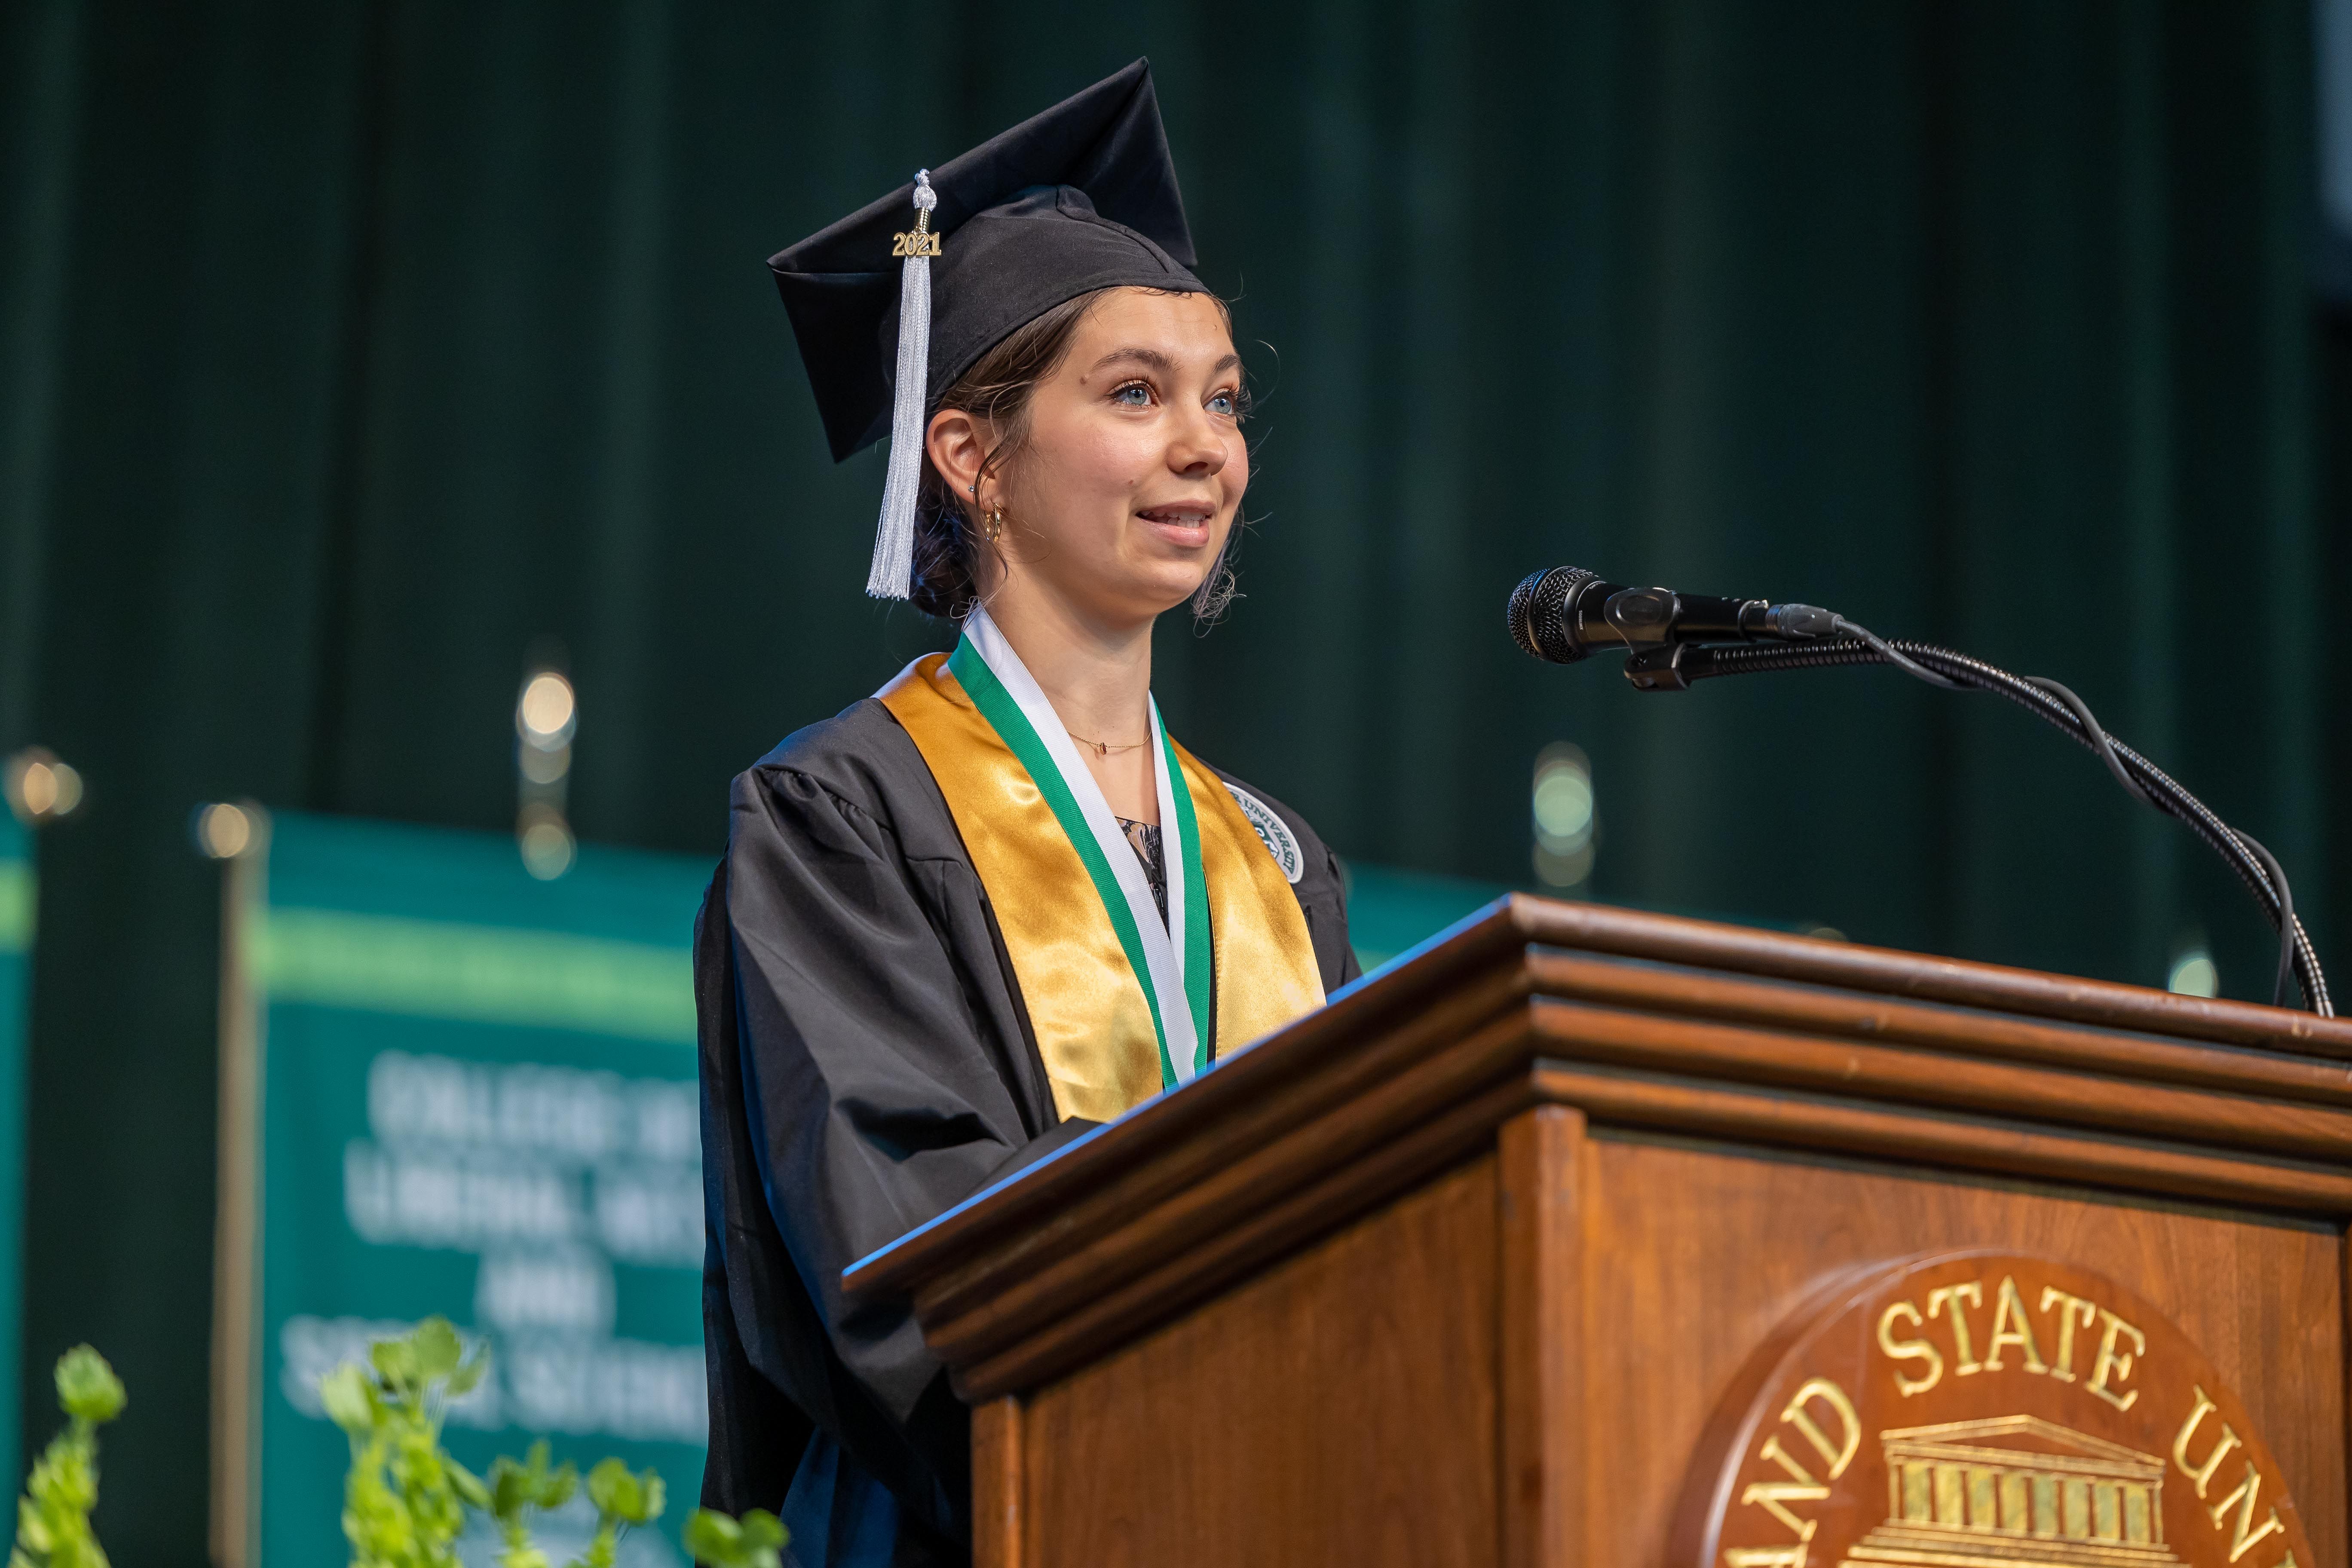 CSU Holds First In-Person Commencement Ceremonies on Campus Since 2019